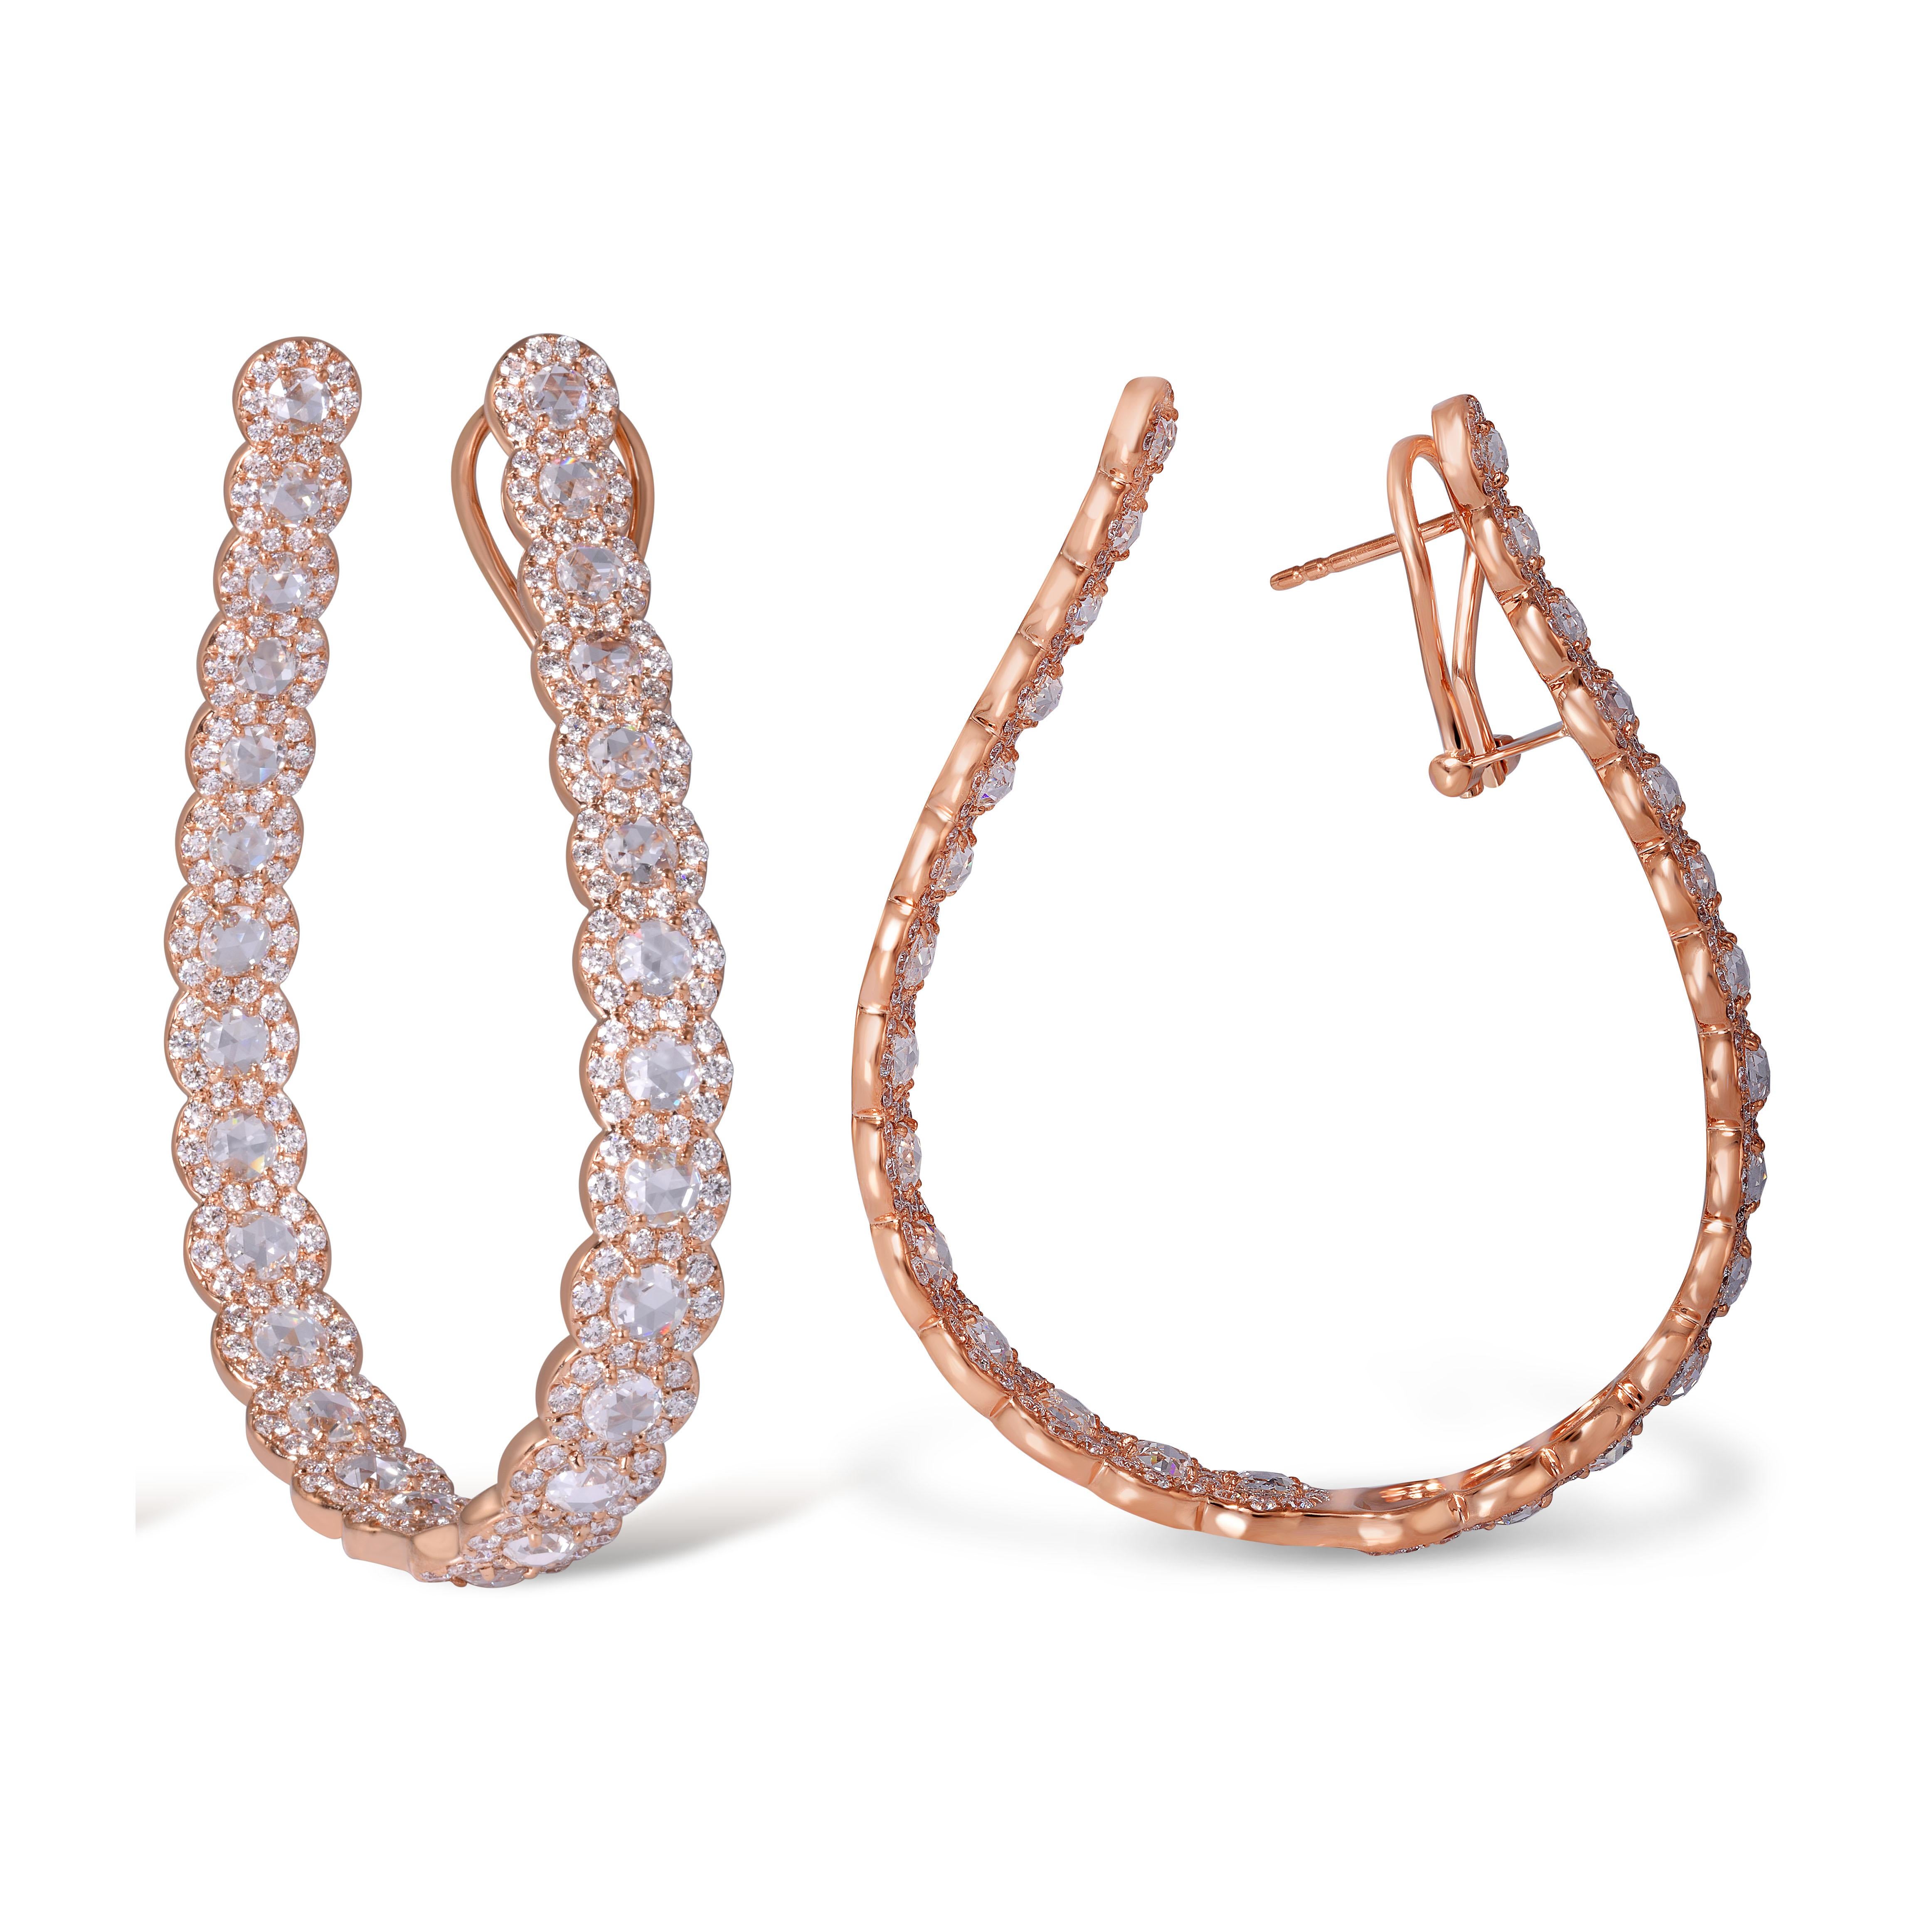 Contemporary Statement Earrings with 10.04 Carat of Fancy Shape Rose cut and Round Diamonds